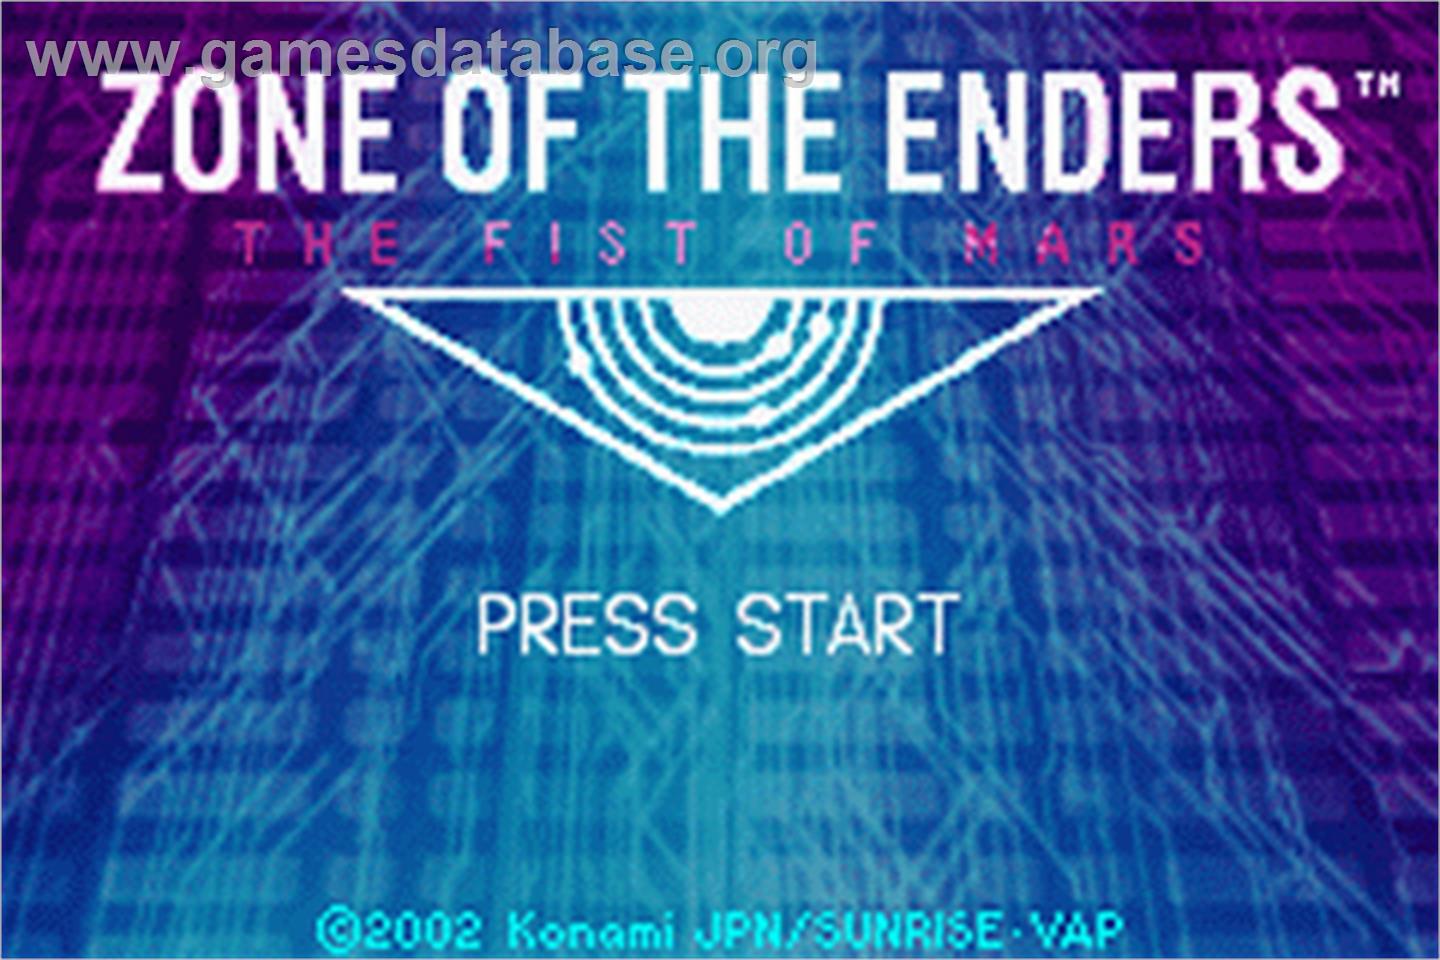 Zone of the Enders: The Fist of Mars - Nintendo Game Boy Advance - Artwork - Title Screen